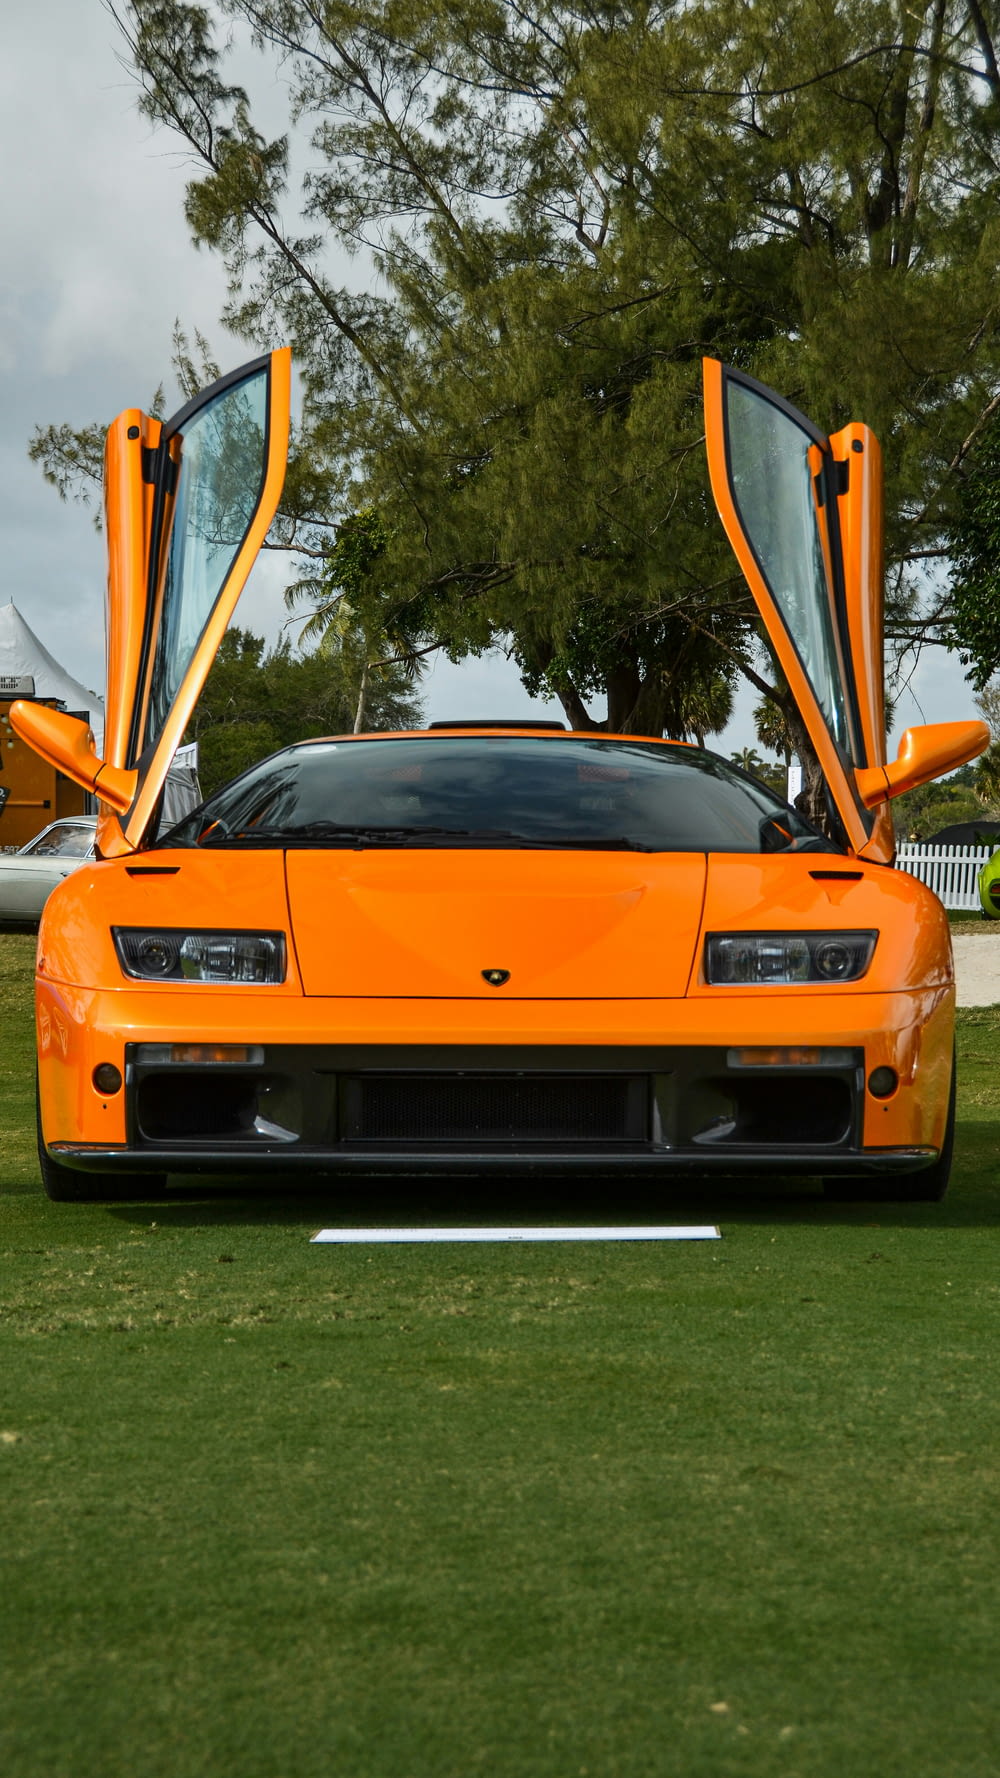 an orange sports car with its doors open